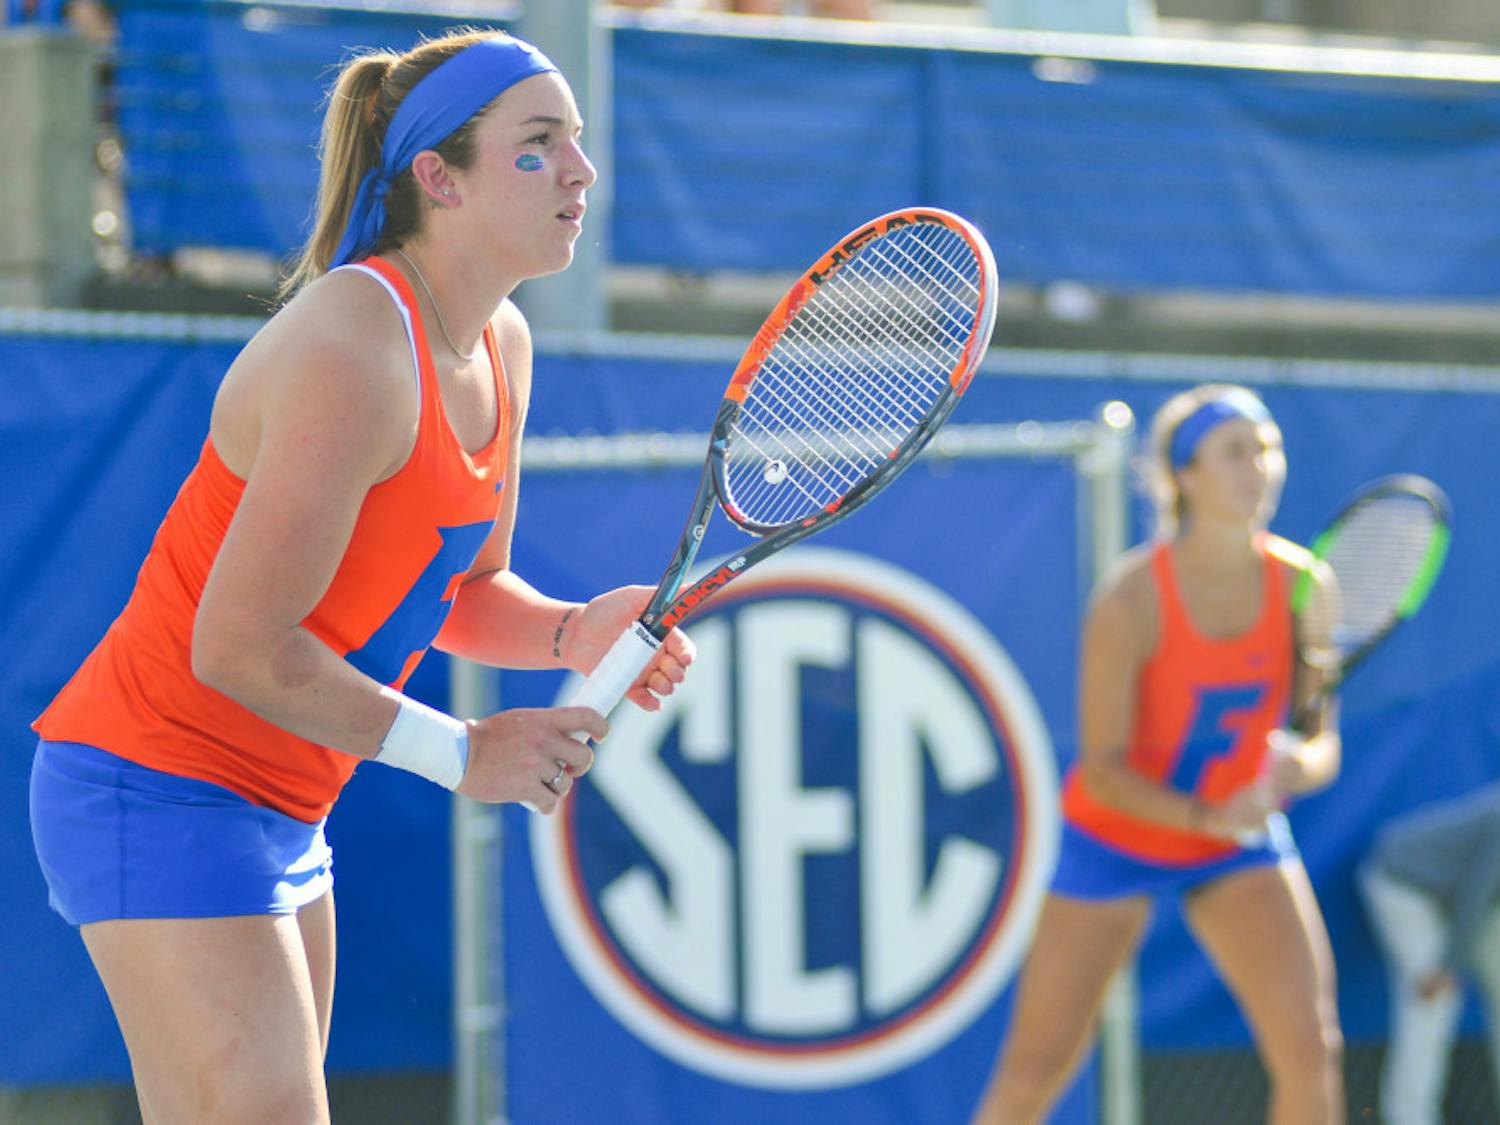 Victoria Emma (pictured) fell to Vanderbilt’s Georgia Drummy 6-0, 6-3 on Sunday in Florida’s 4-3 loss to the Commodores. 